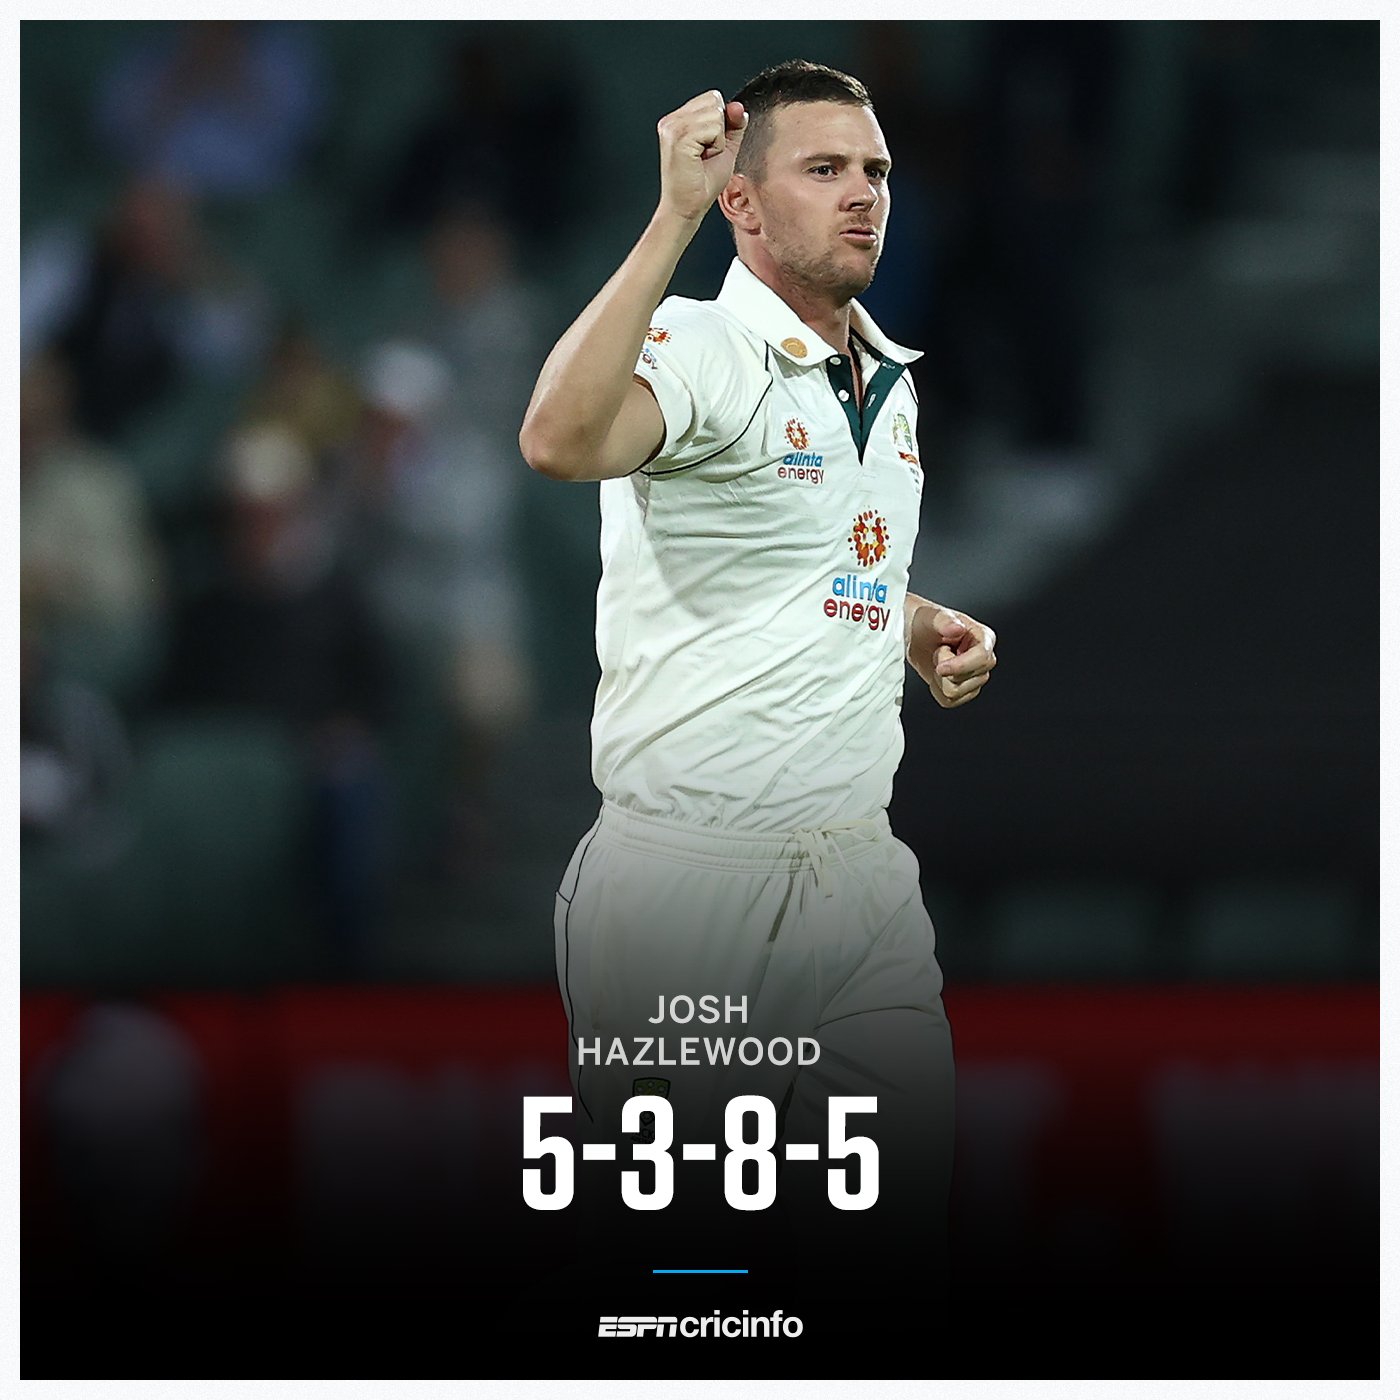 ESPNcricinfo on Twitter: "What a spell for Josh Hazlewood! He gets his  200th Test wicket and helps bowl India out for their lowest ever Test total  https://t.co/LpGyT3sEbd #AUSvIND https://t.co/w9NkQu54S2" / Twitter